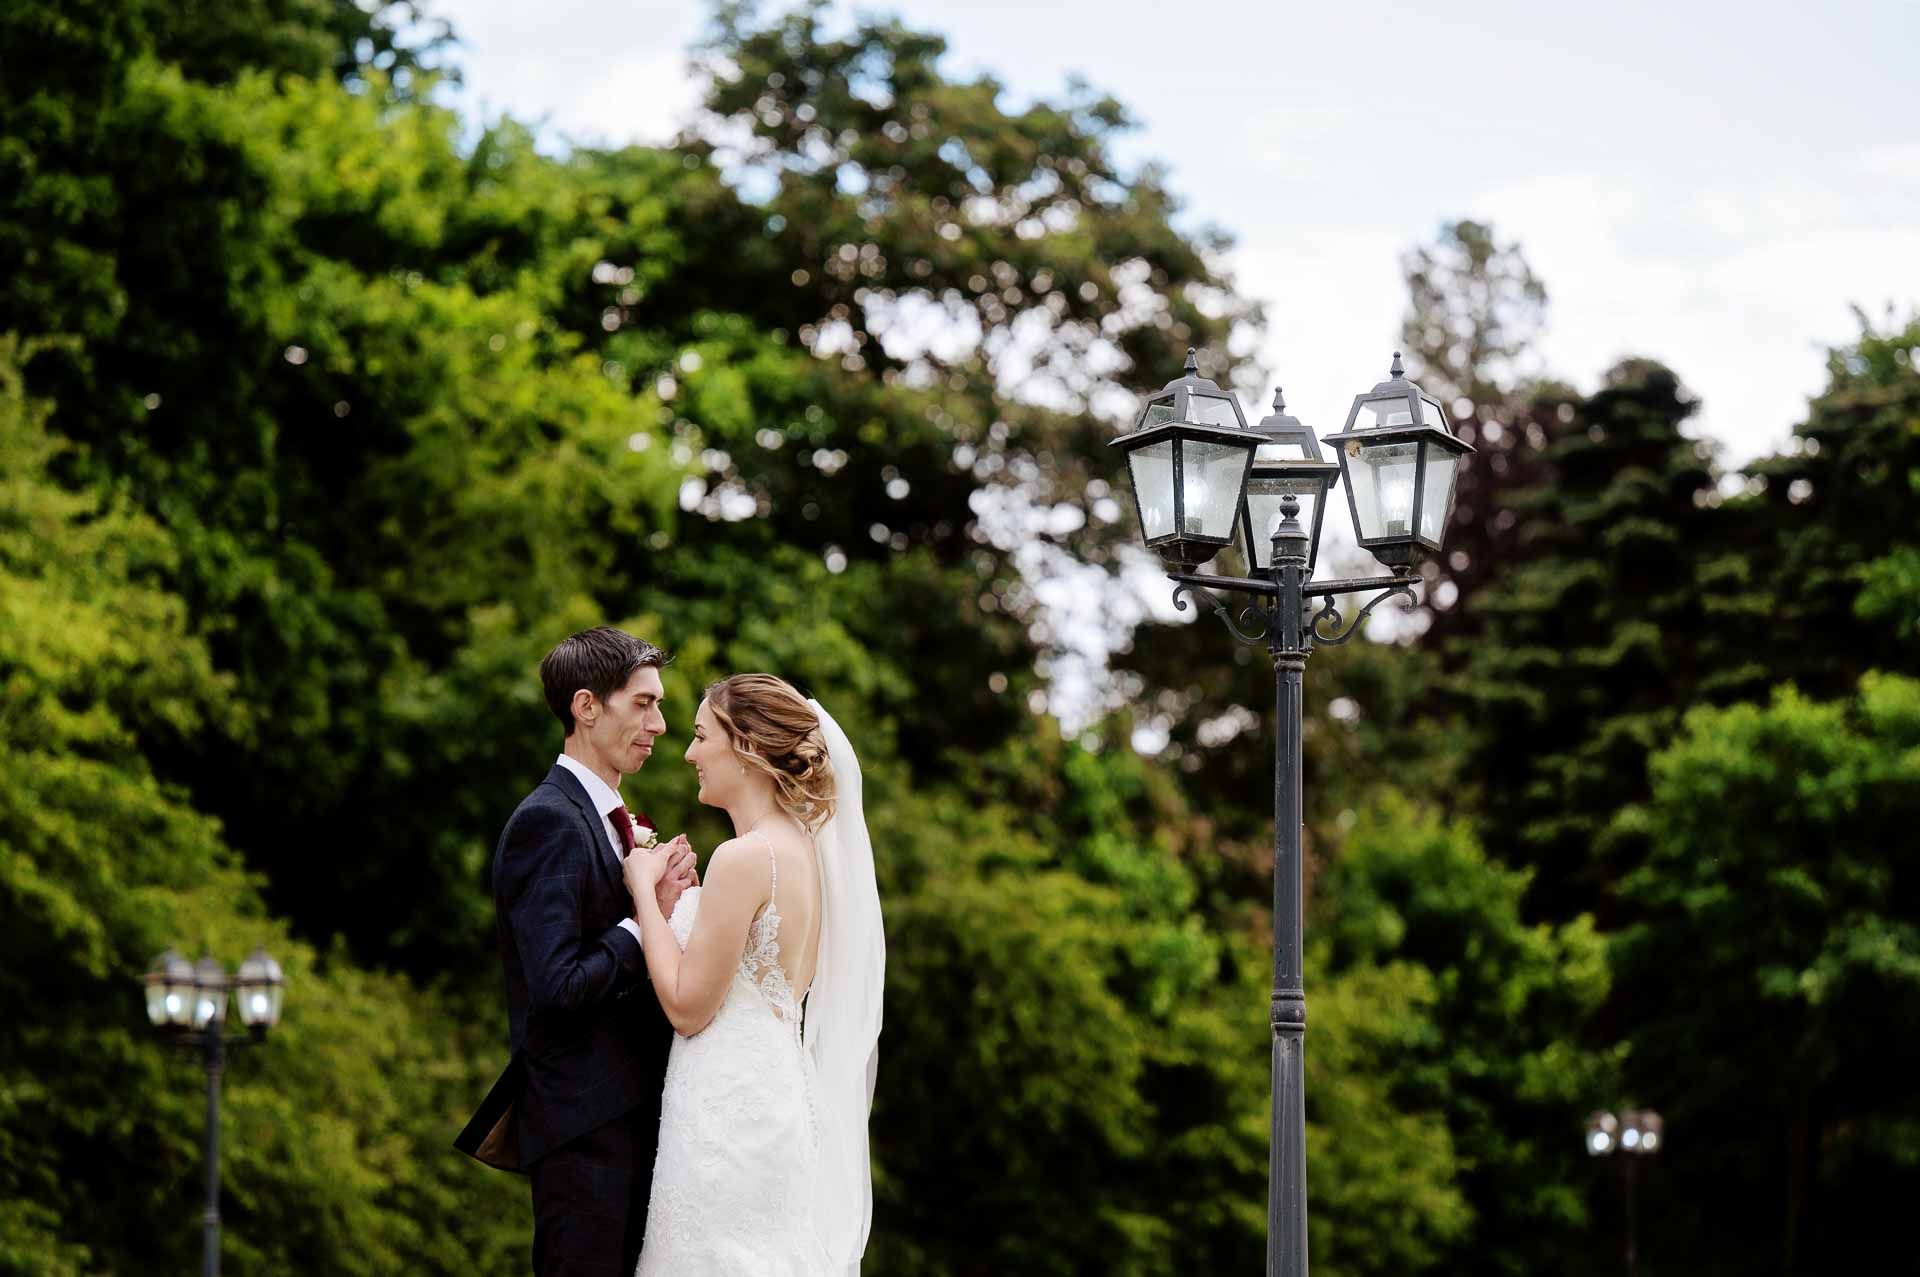 Sophie and Ross holding hands, smiling at each other stood between two lamp posts during their couples photoshoot at Swynford Manor. Photography by Fountain Photography. Videography by Veiled Productions.